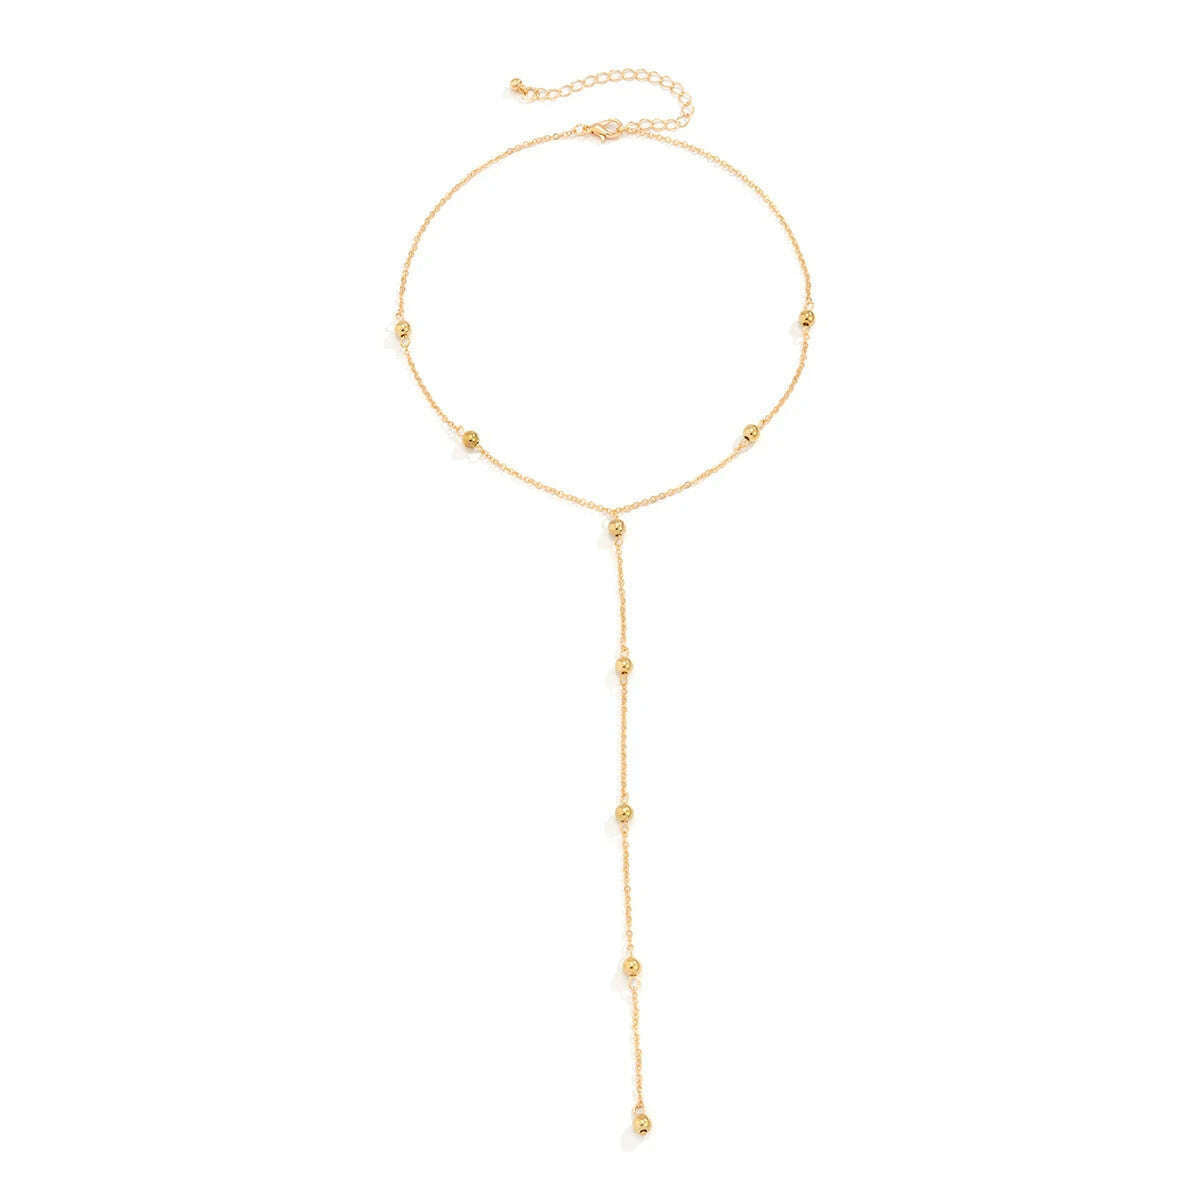 KIMLUD, Ingemark Minimalism 2022 Long Tassel Necklace for Women Girls Vintage Chest Thin Chain Ball Pendant Female Neck Jewelry Gift New, KIMLUD Womens Clothes